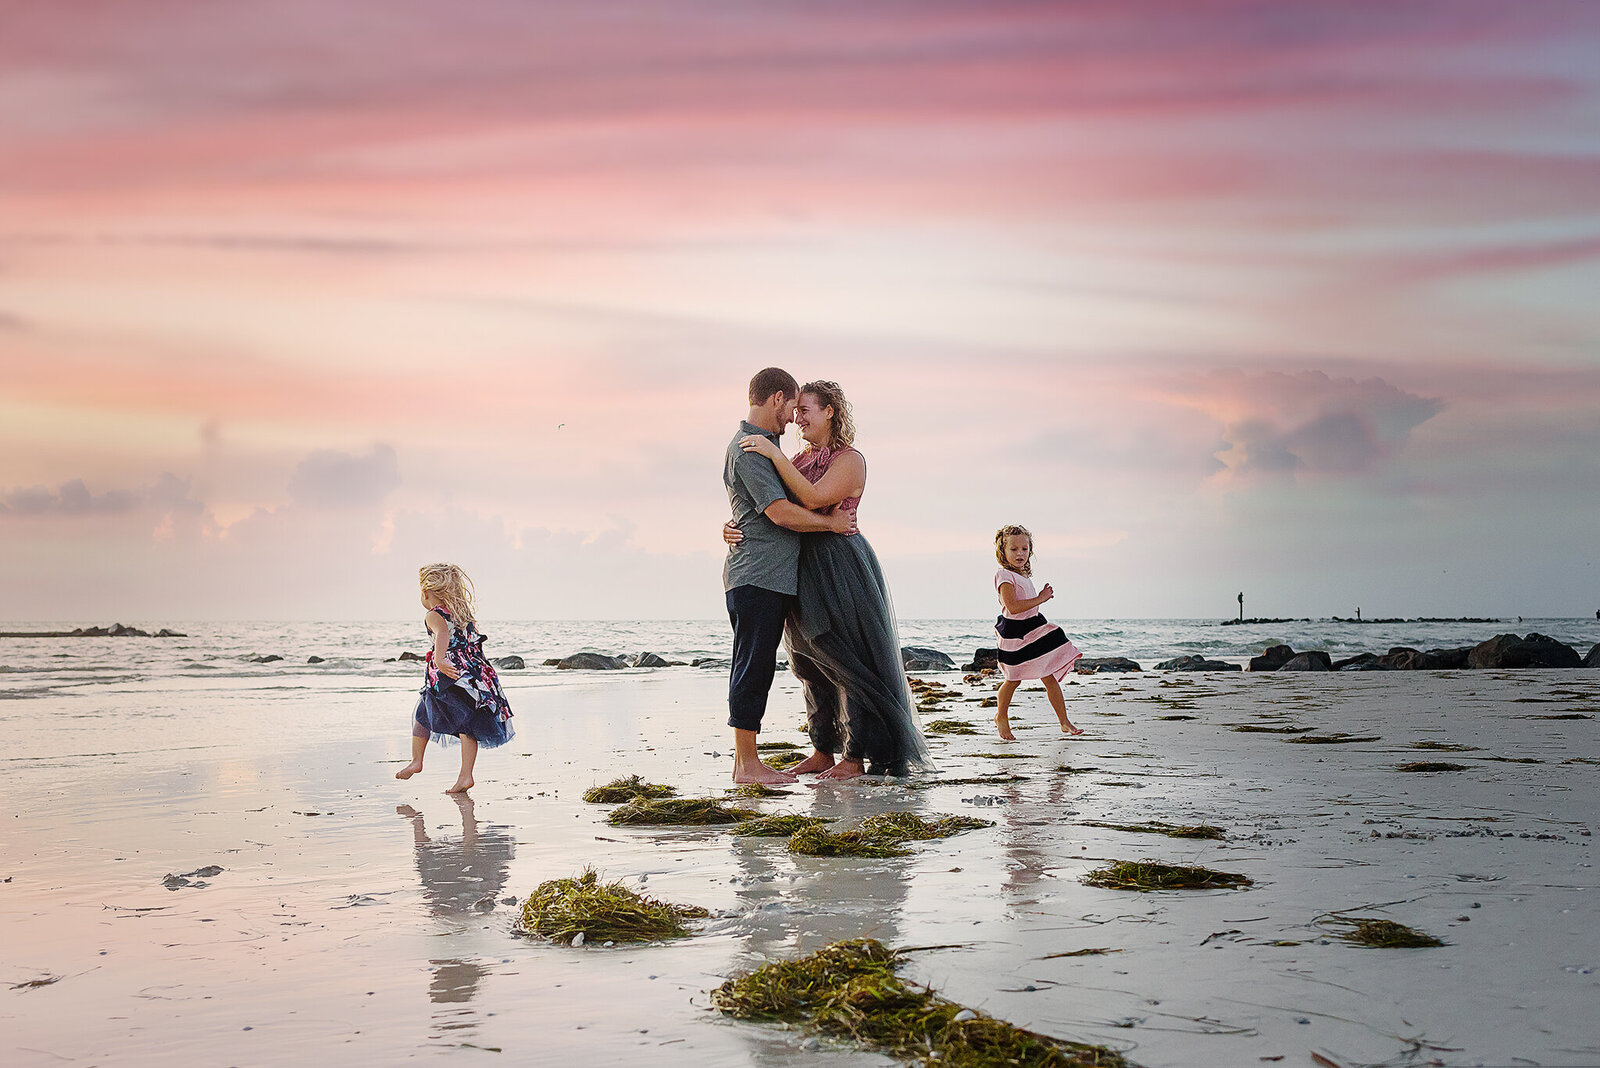 Mom and dad embracing while daughters run around them on beach in Florida.